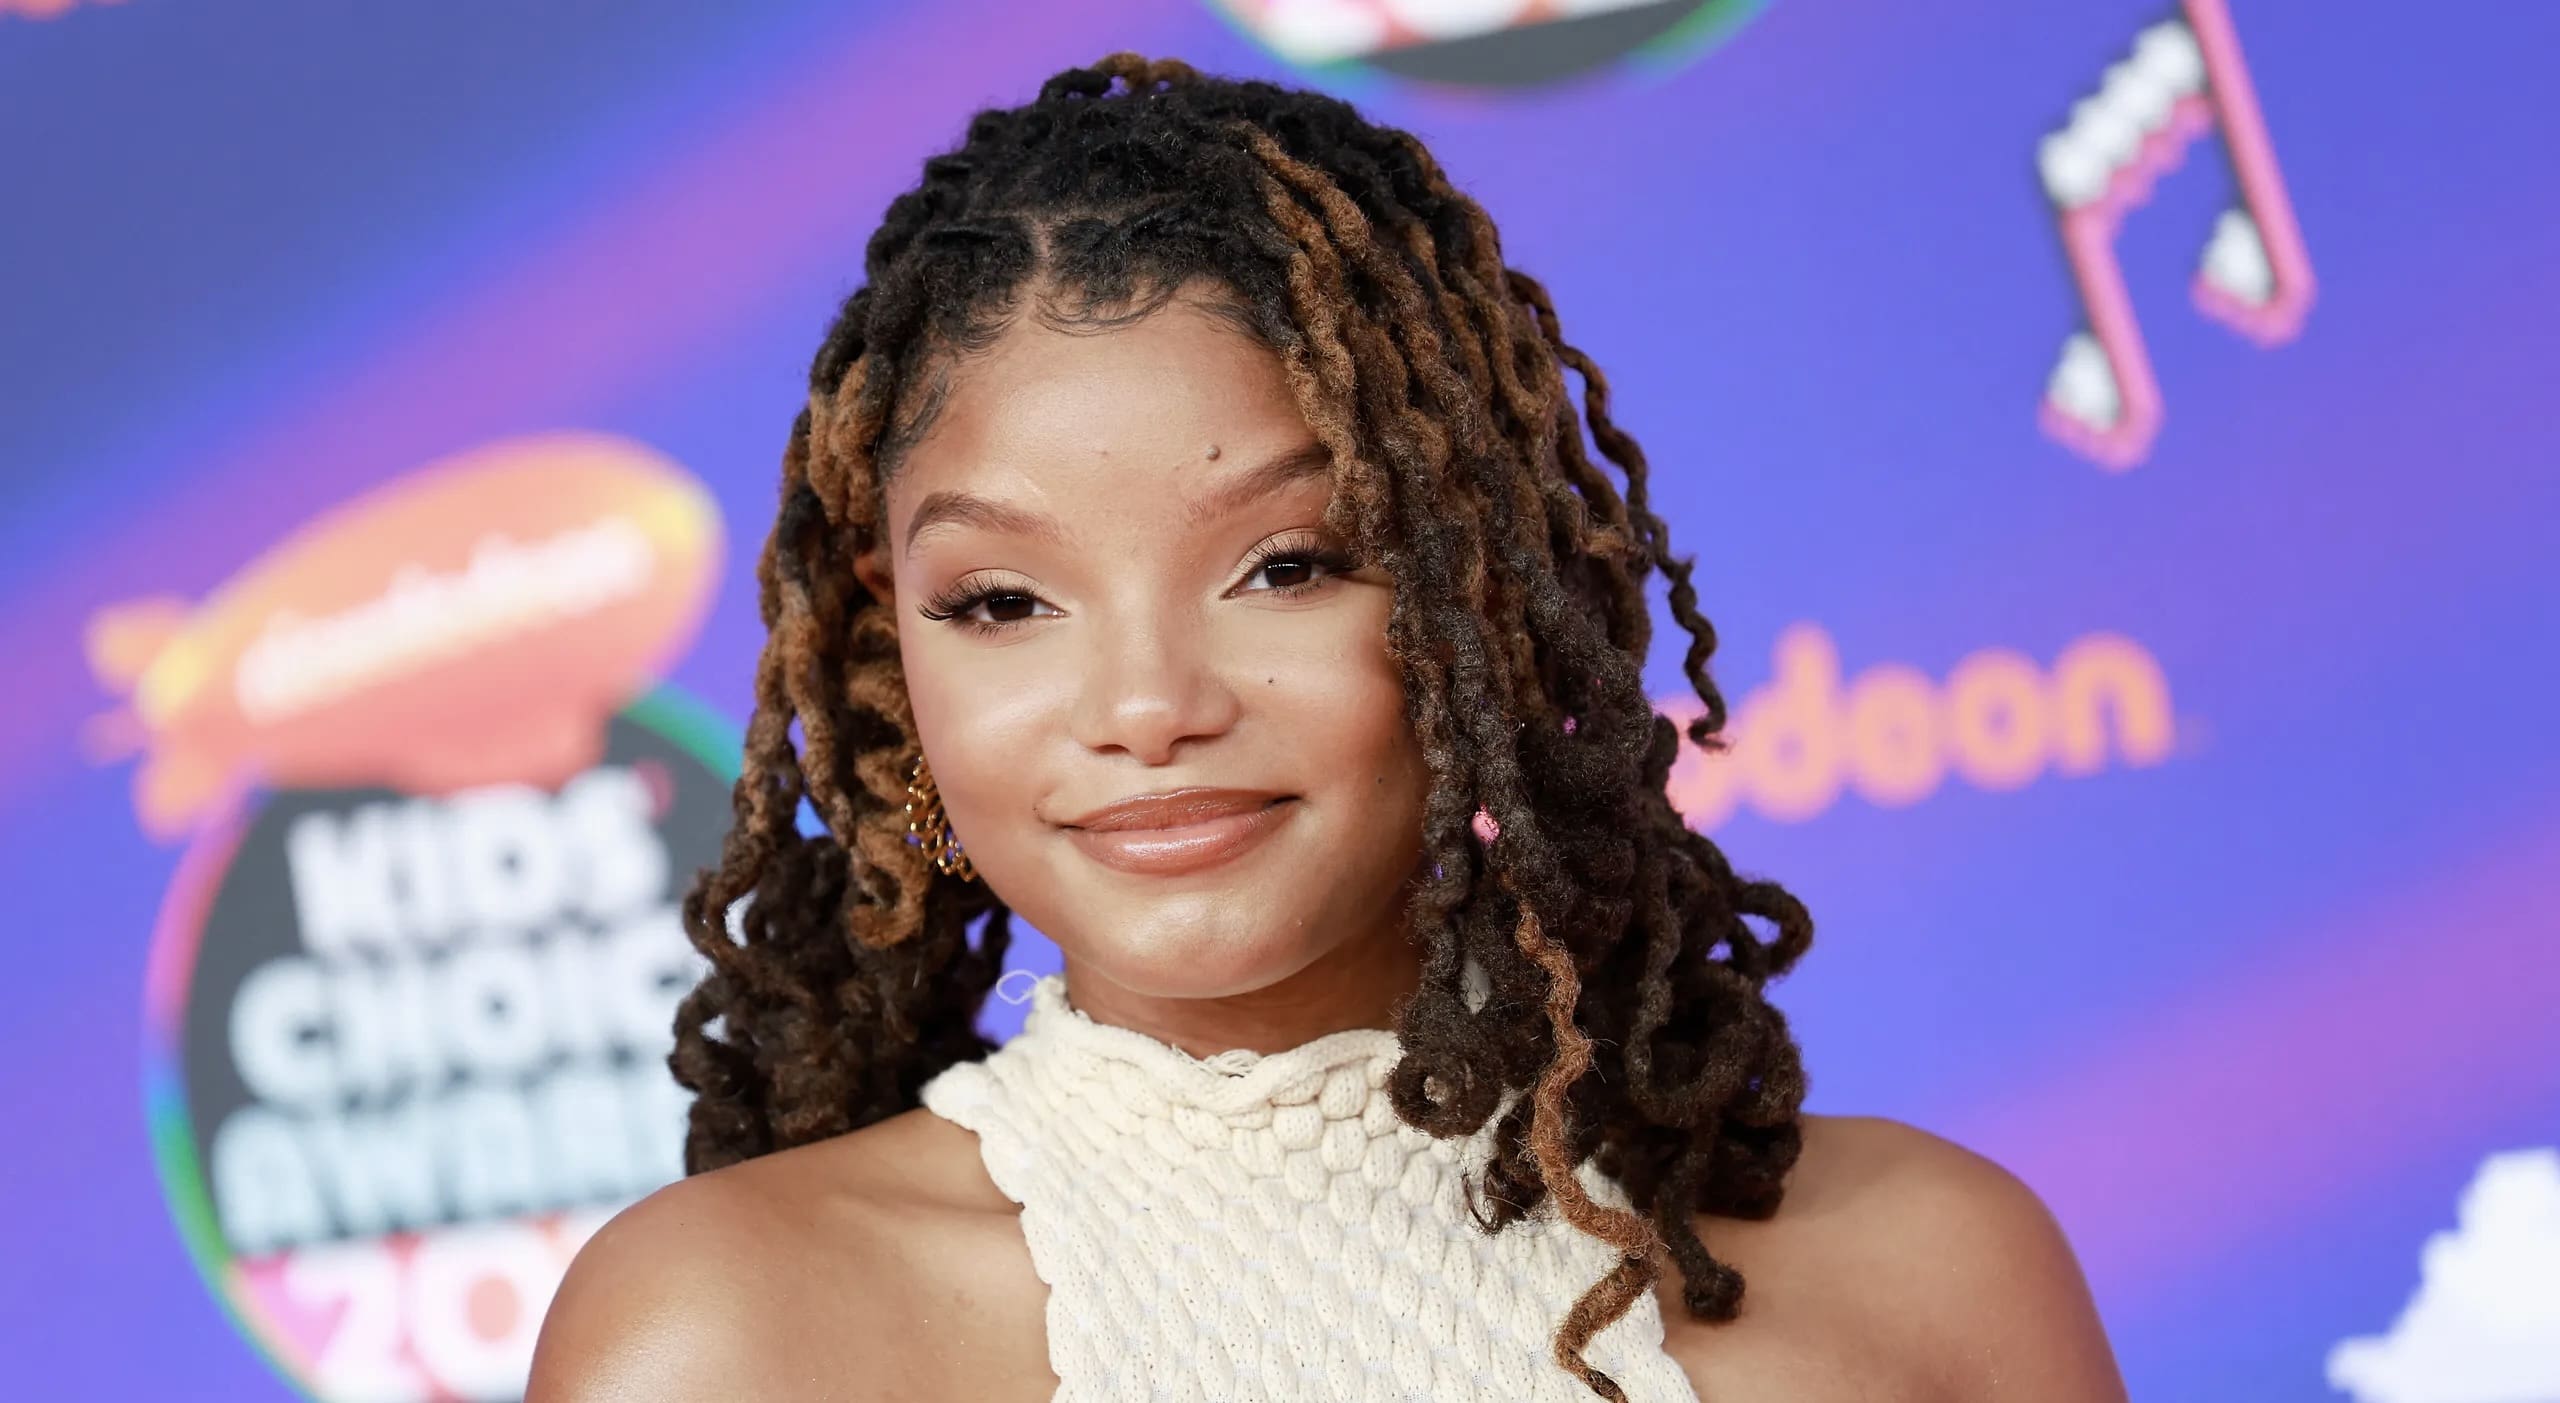 Halle Bailey Shared An Adorable Video Of A Little Fan Who Just Could Not Let Go Of Her At Disney World